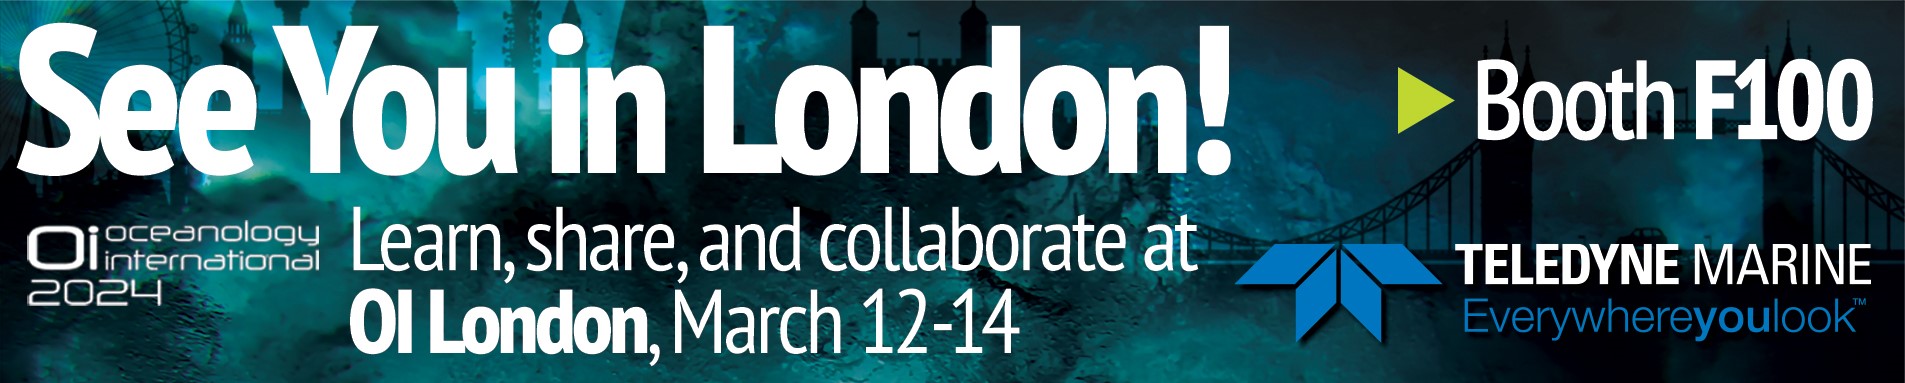 See You in London Booth F100 March 12 - 14, 2024